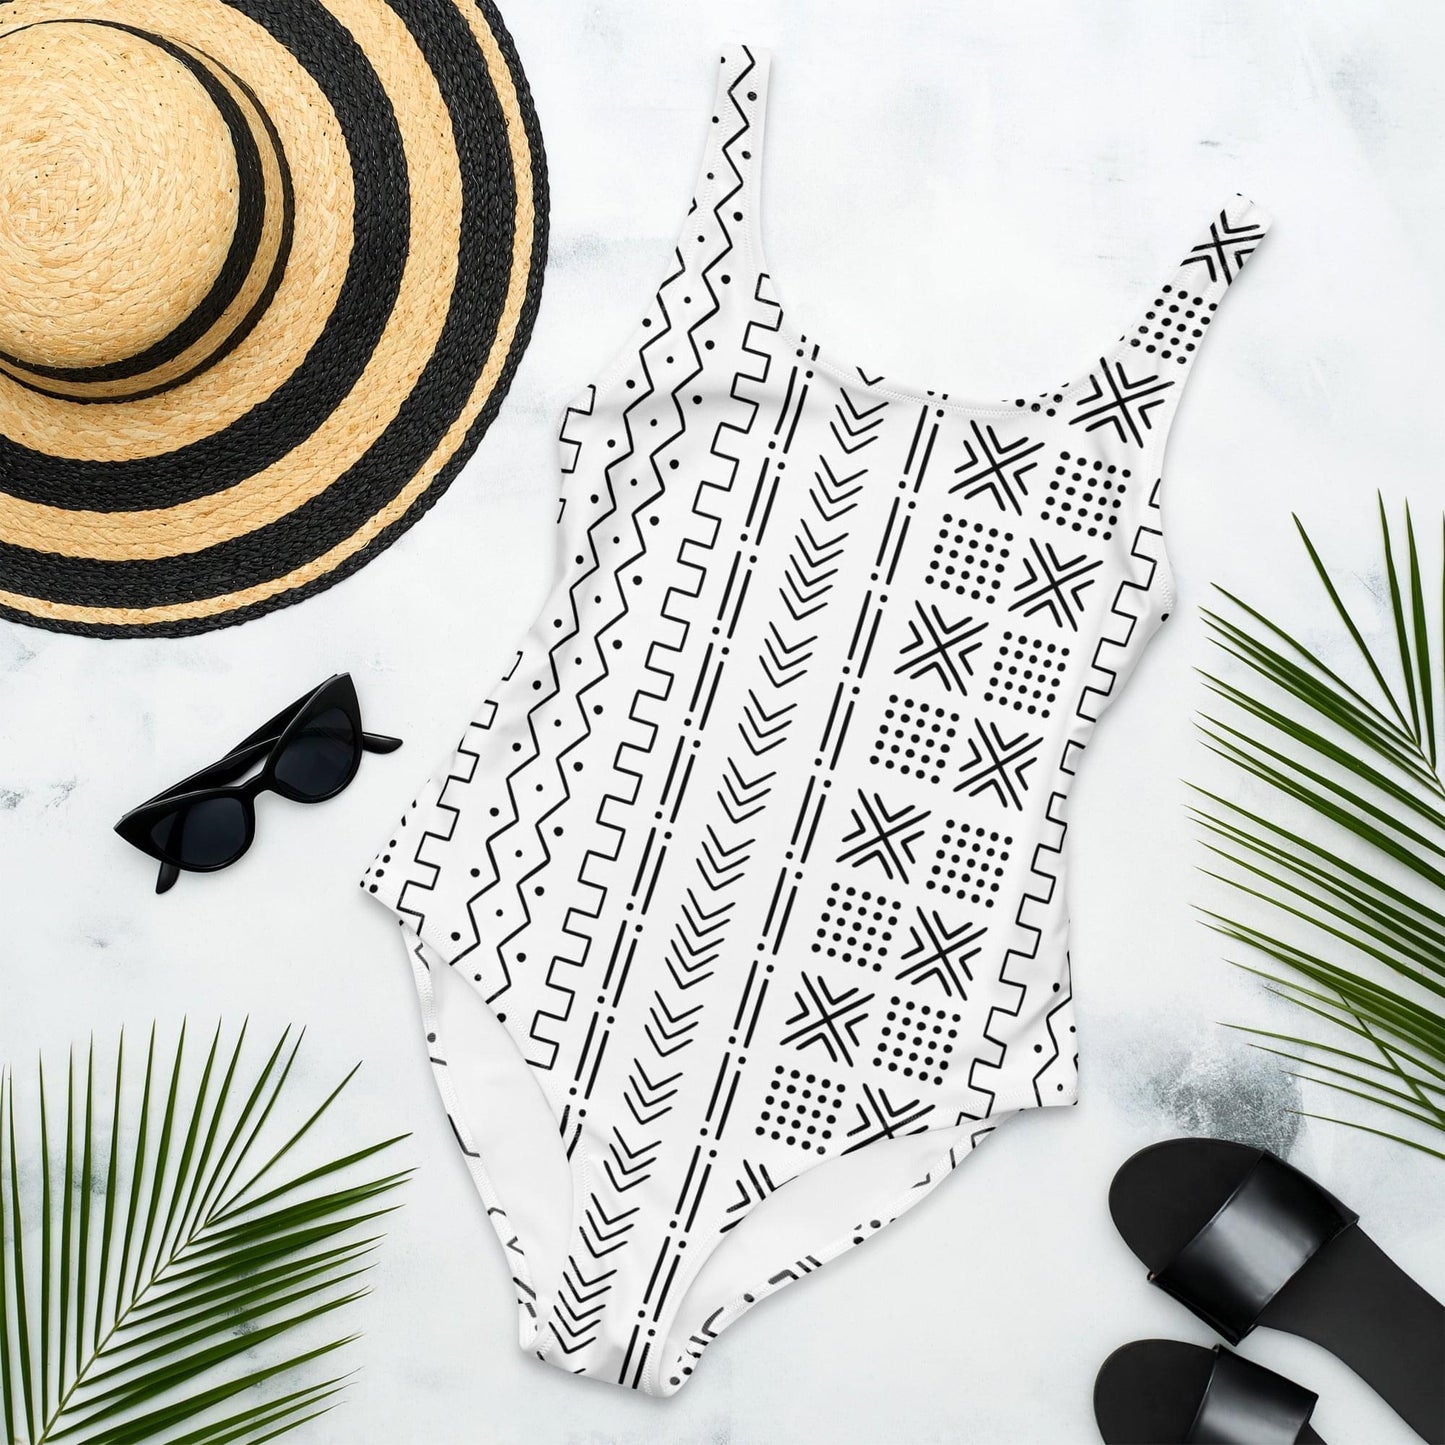 African Mud Cloth One-Piece Swimsuit - The Global Wanderer